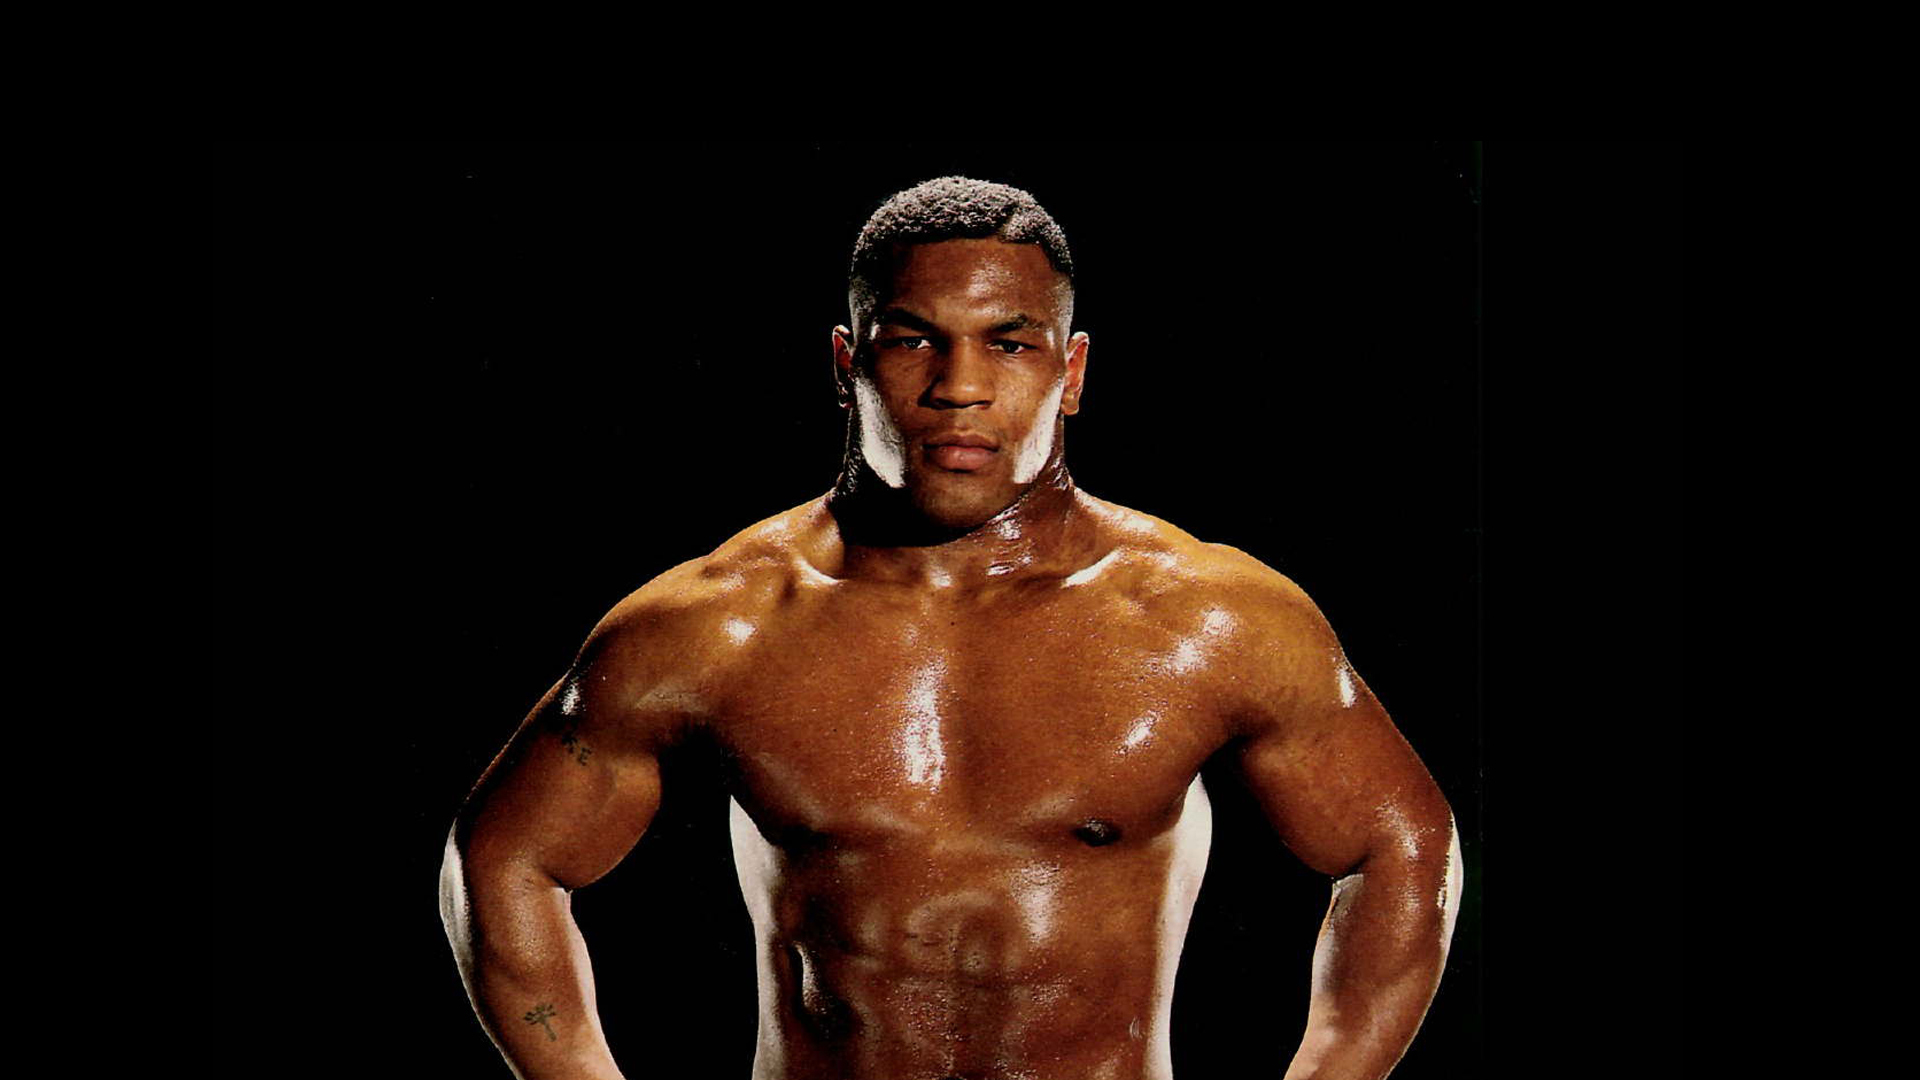 Mike Tyson HD Wallpaper Background Of Your Choice